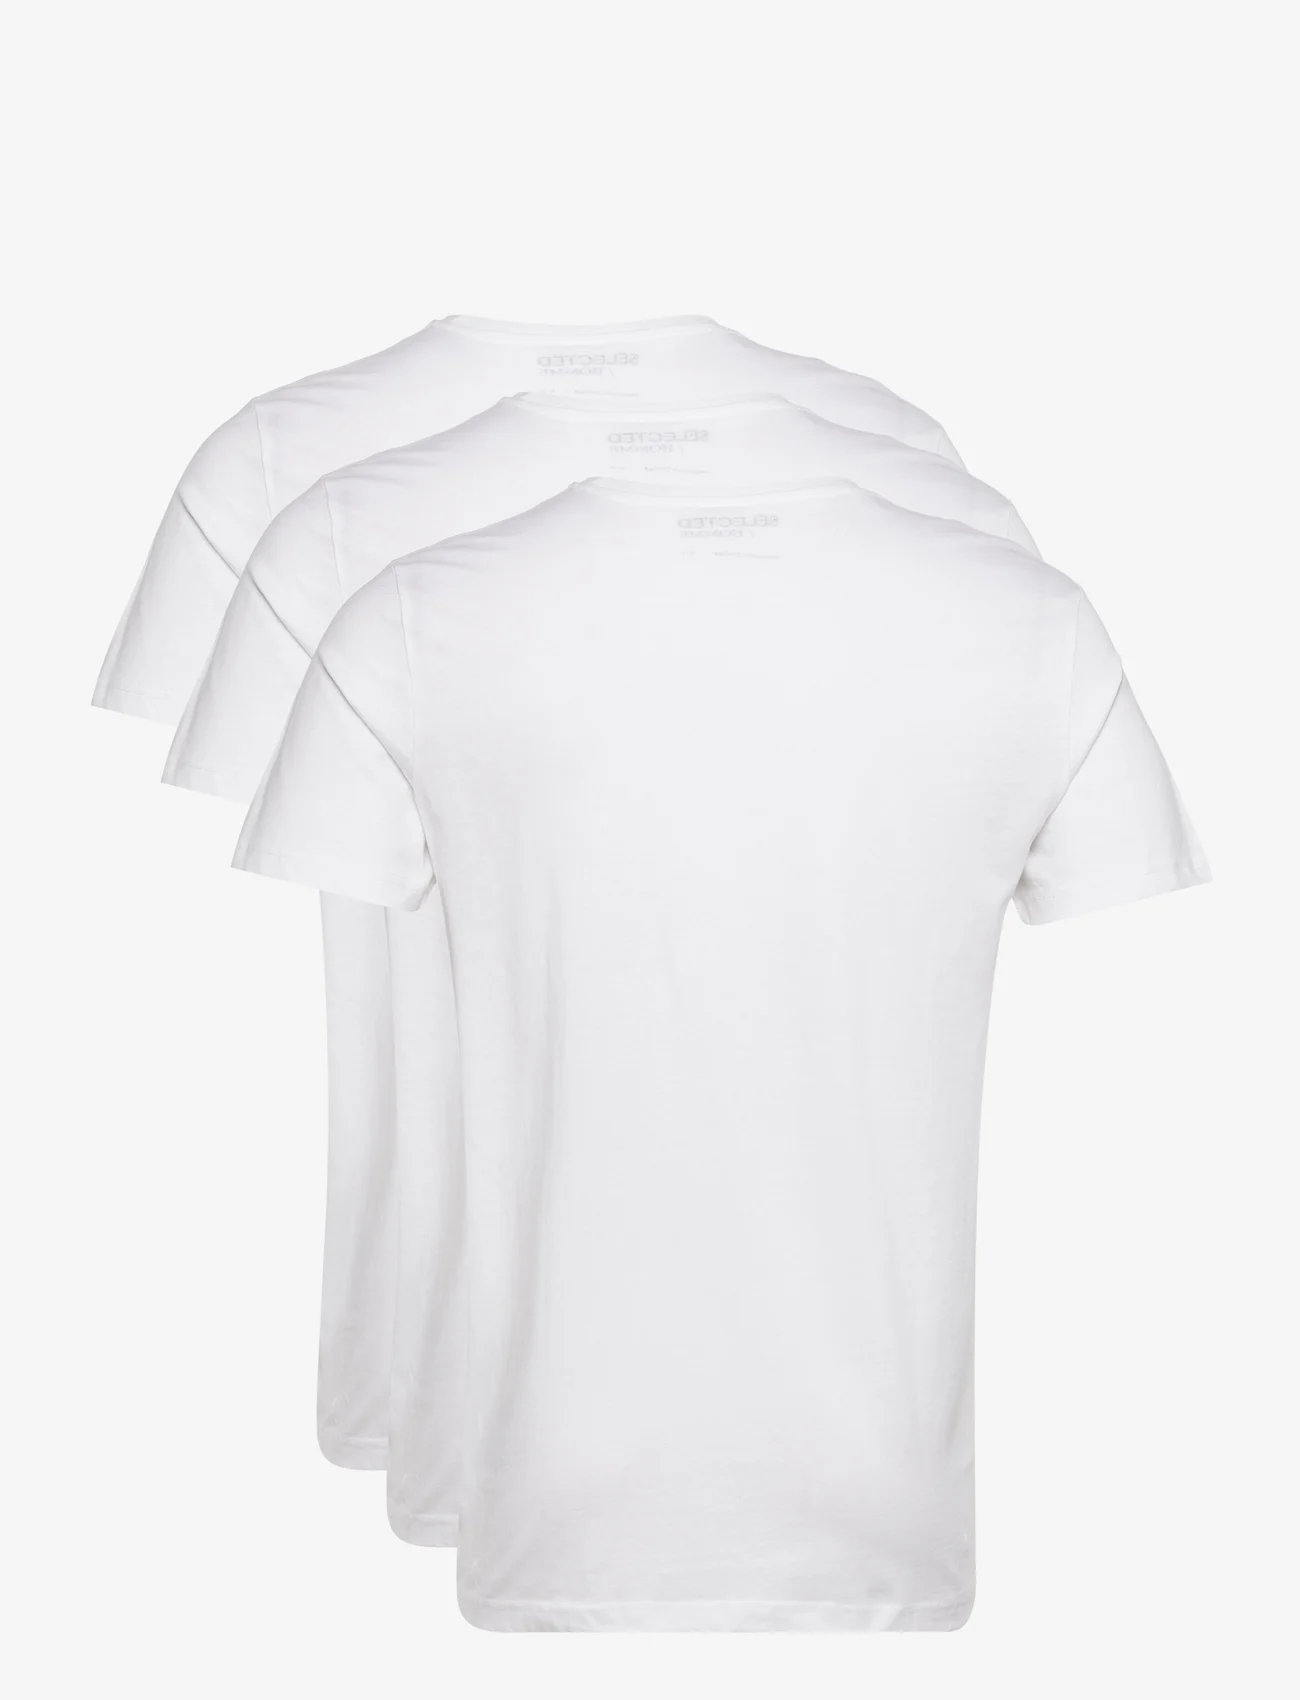 Selected Homme - SLHAXEL SS O-NECK TEE 3 PACK NOOS - laveste priser - bright white - 1